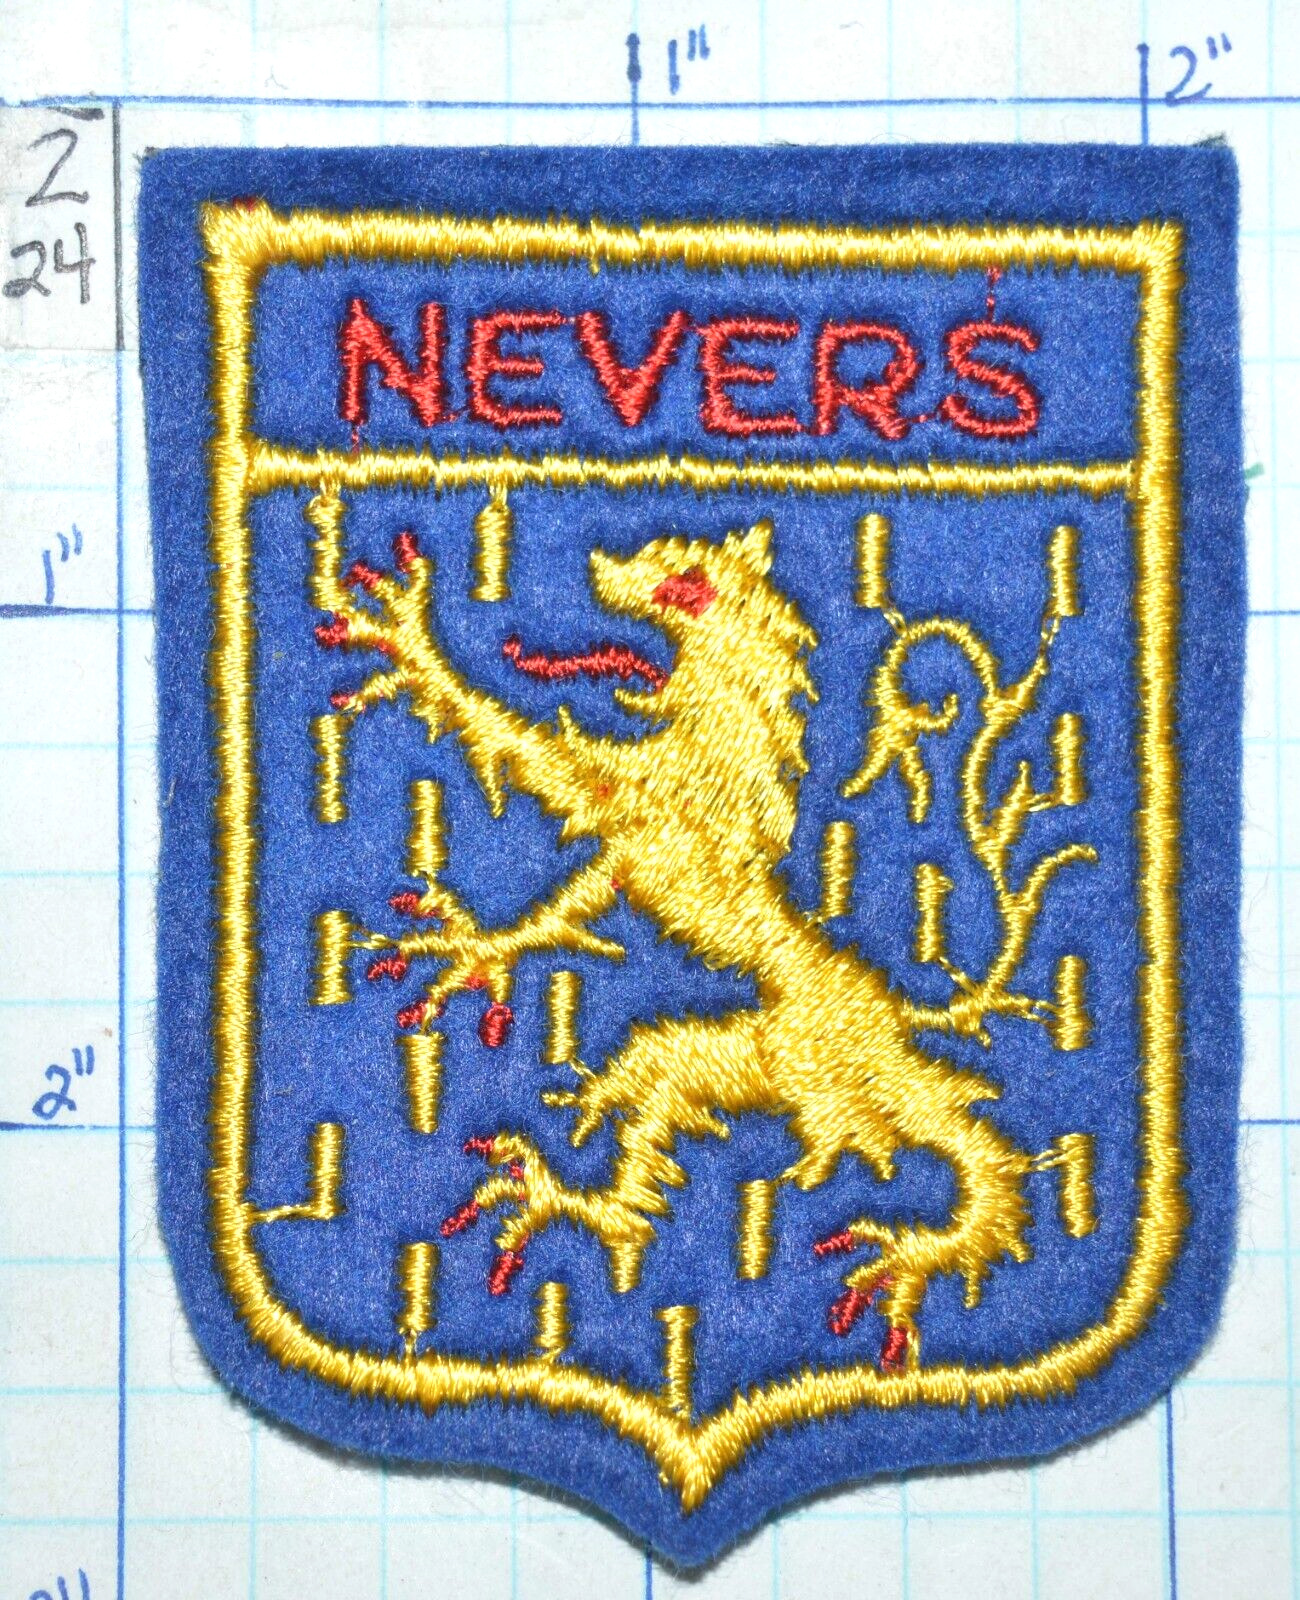 CITY OF NEVERS FRANCE COAT OF ARMS VINTAGE FELT PATCH